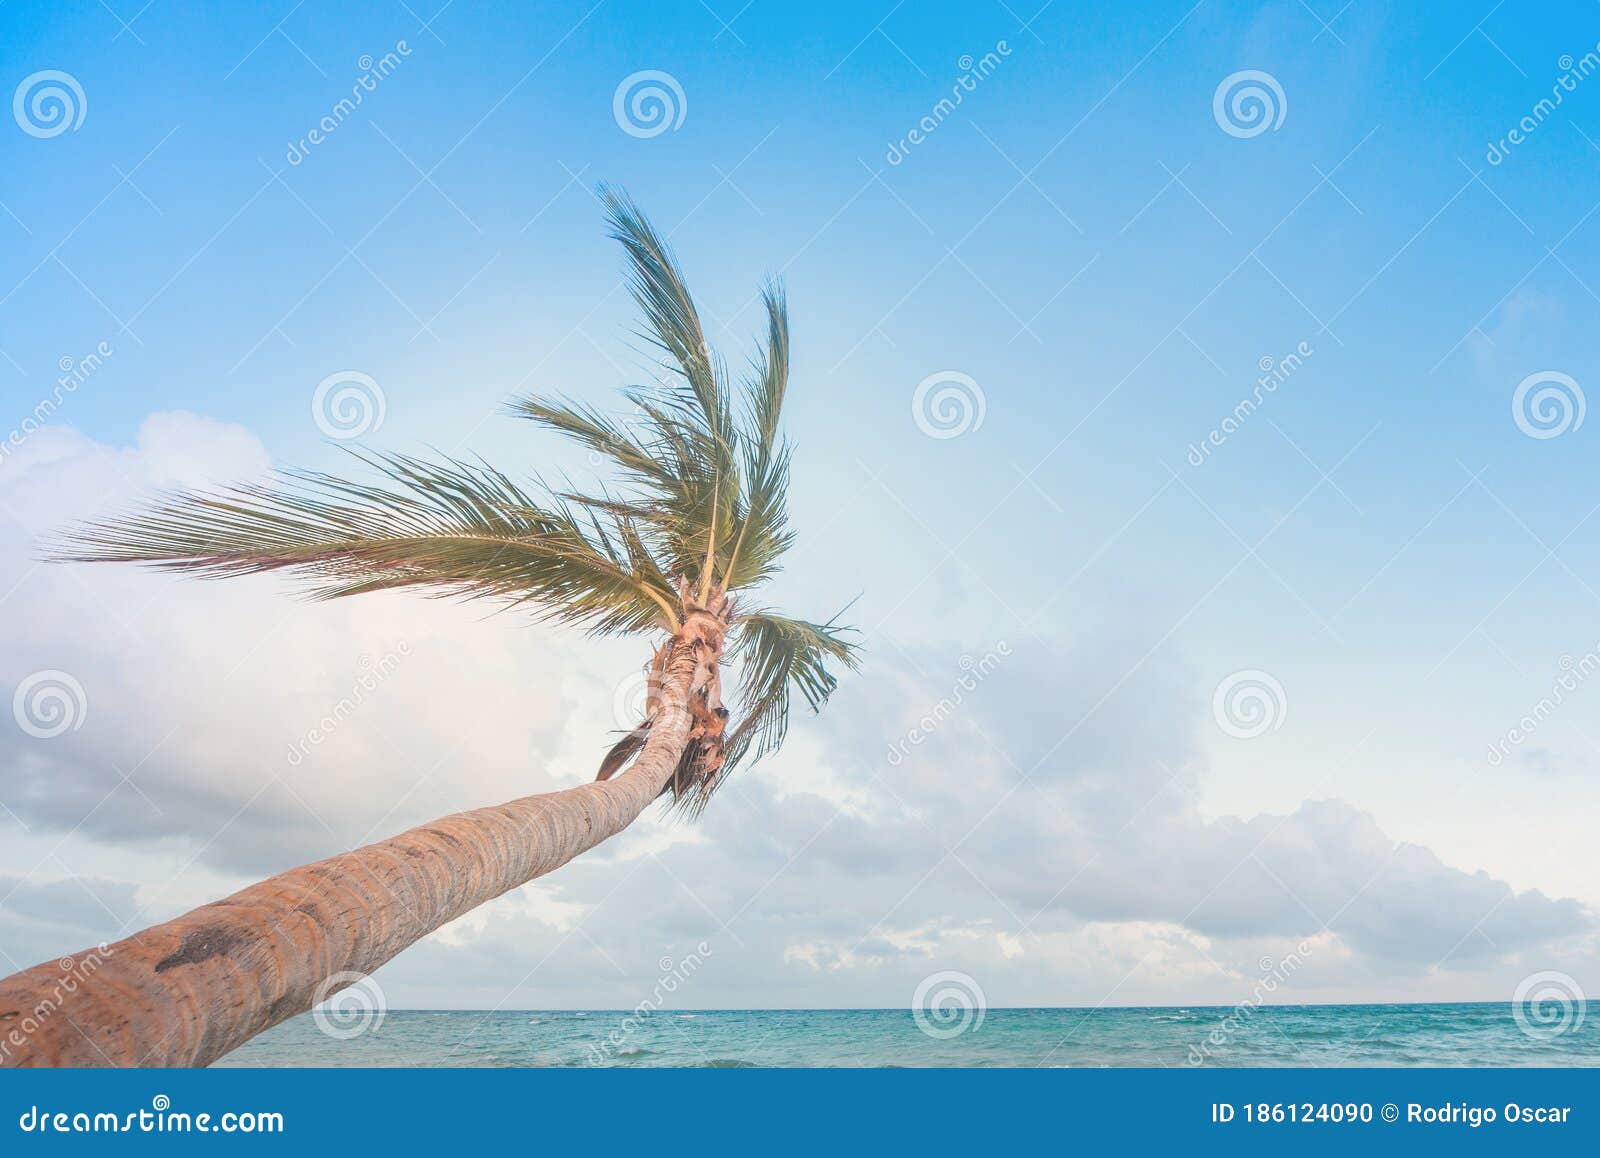 sunny beach in mexican caribe, palm tree.